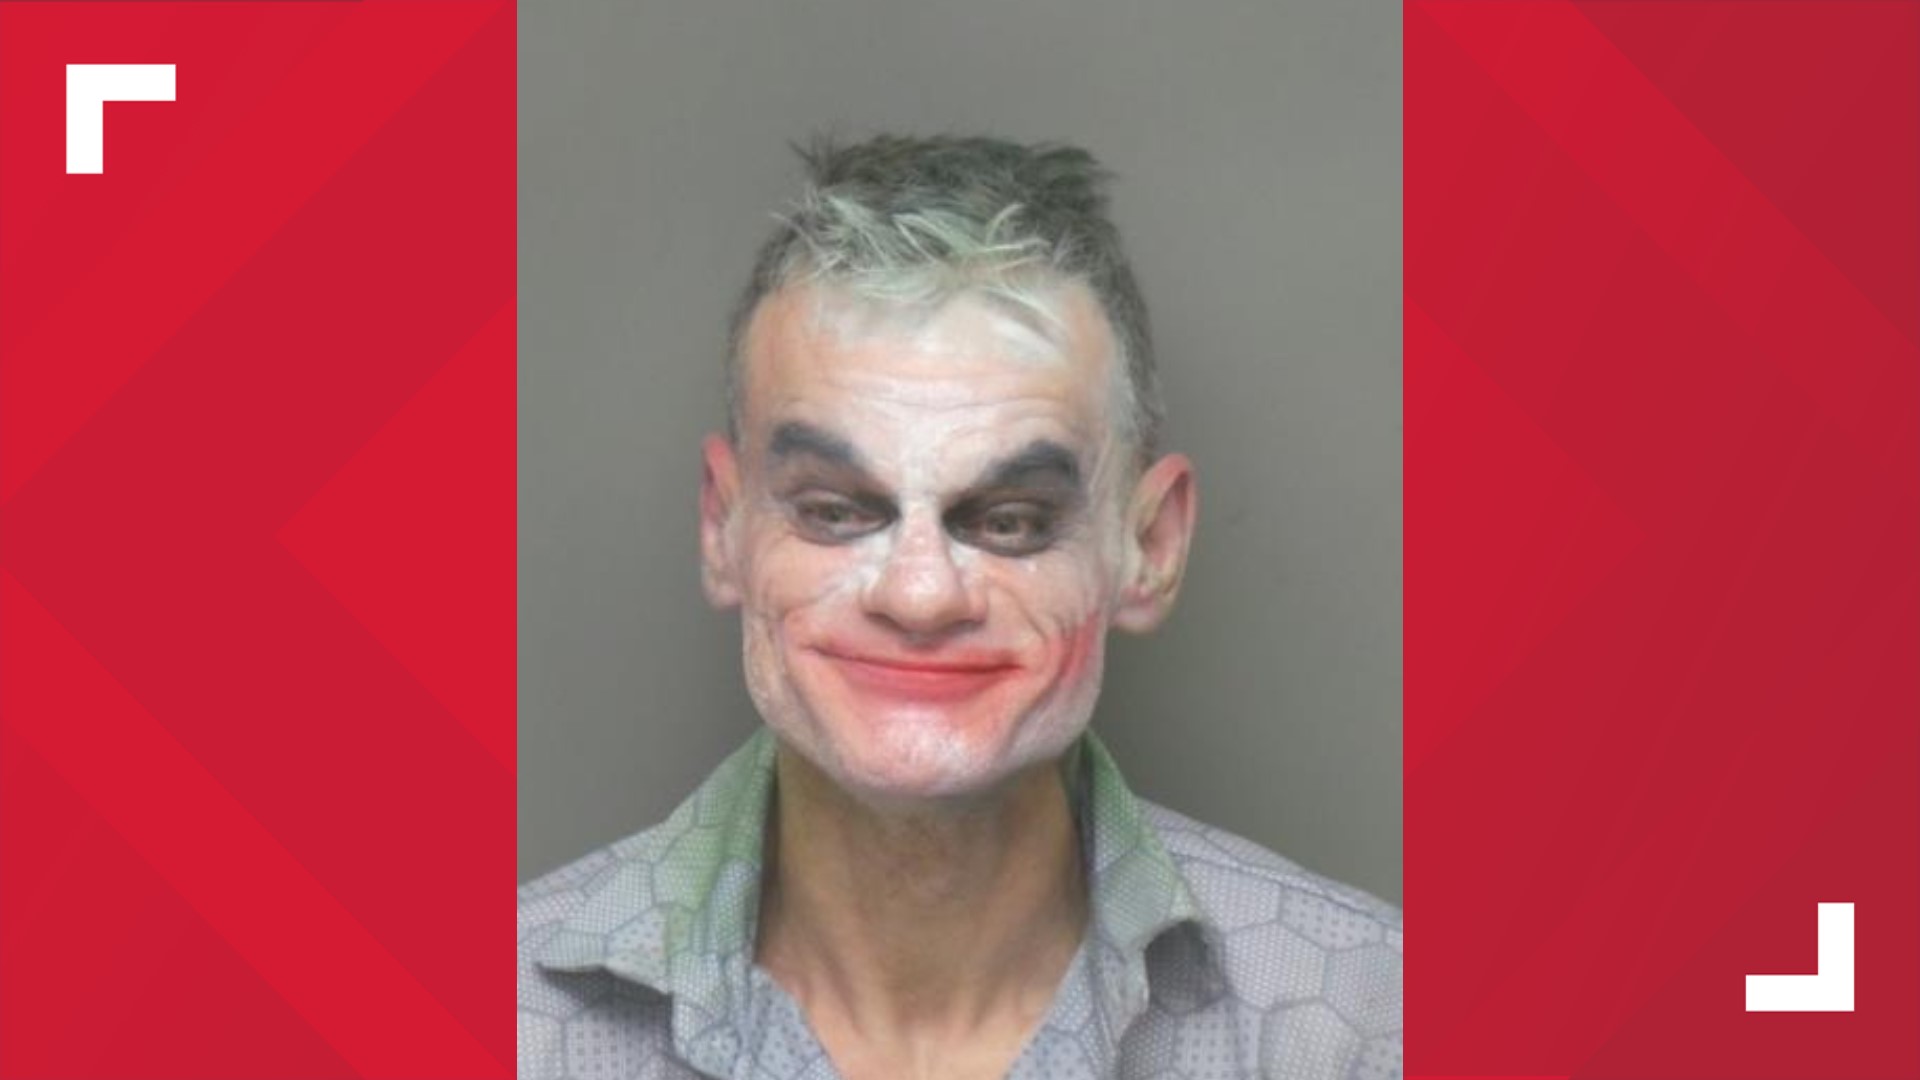 Jeremy Garnier put on makeup to look like 'Joker' from the movie and then livestreamed threats on Facebook.